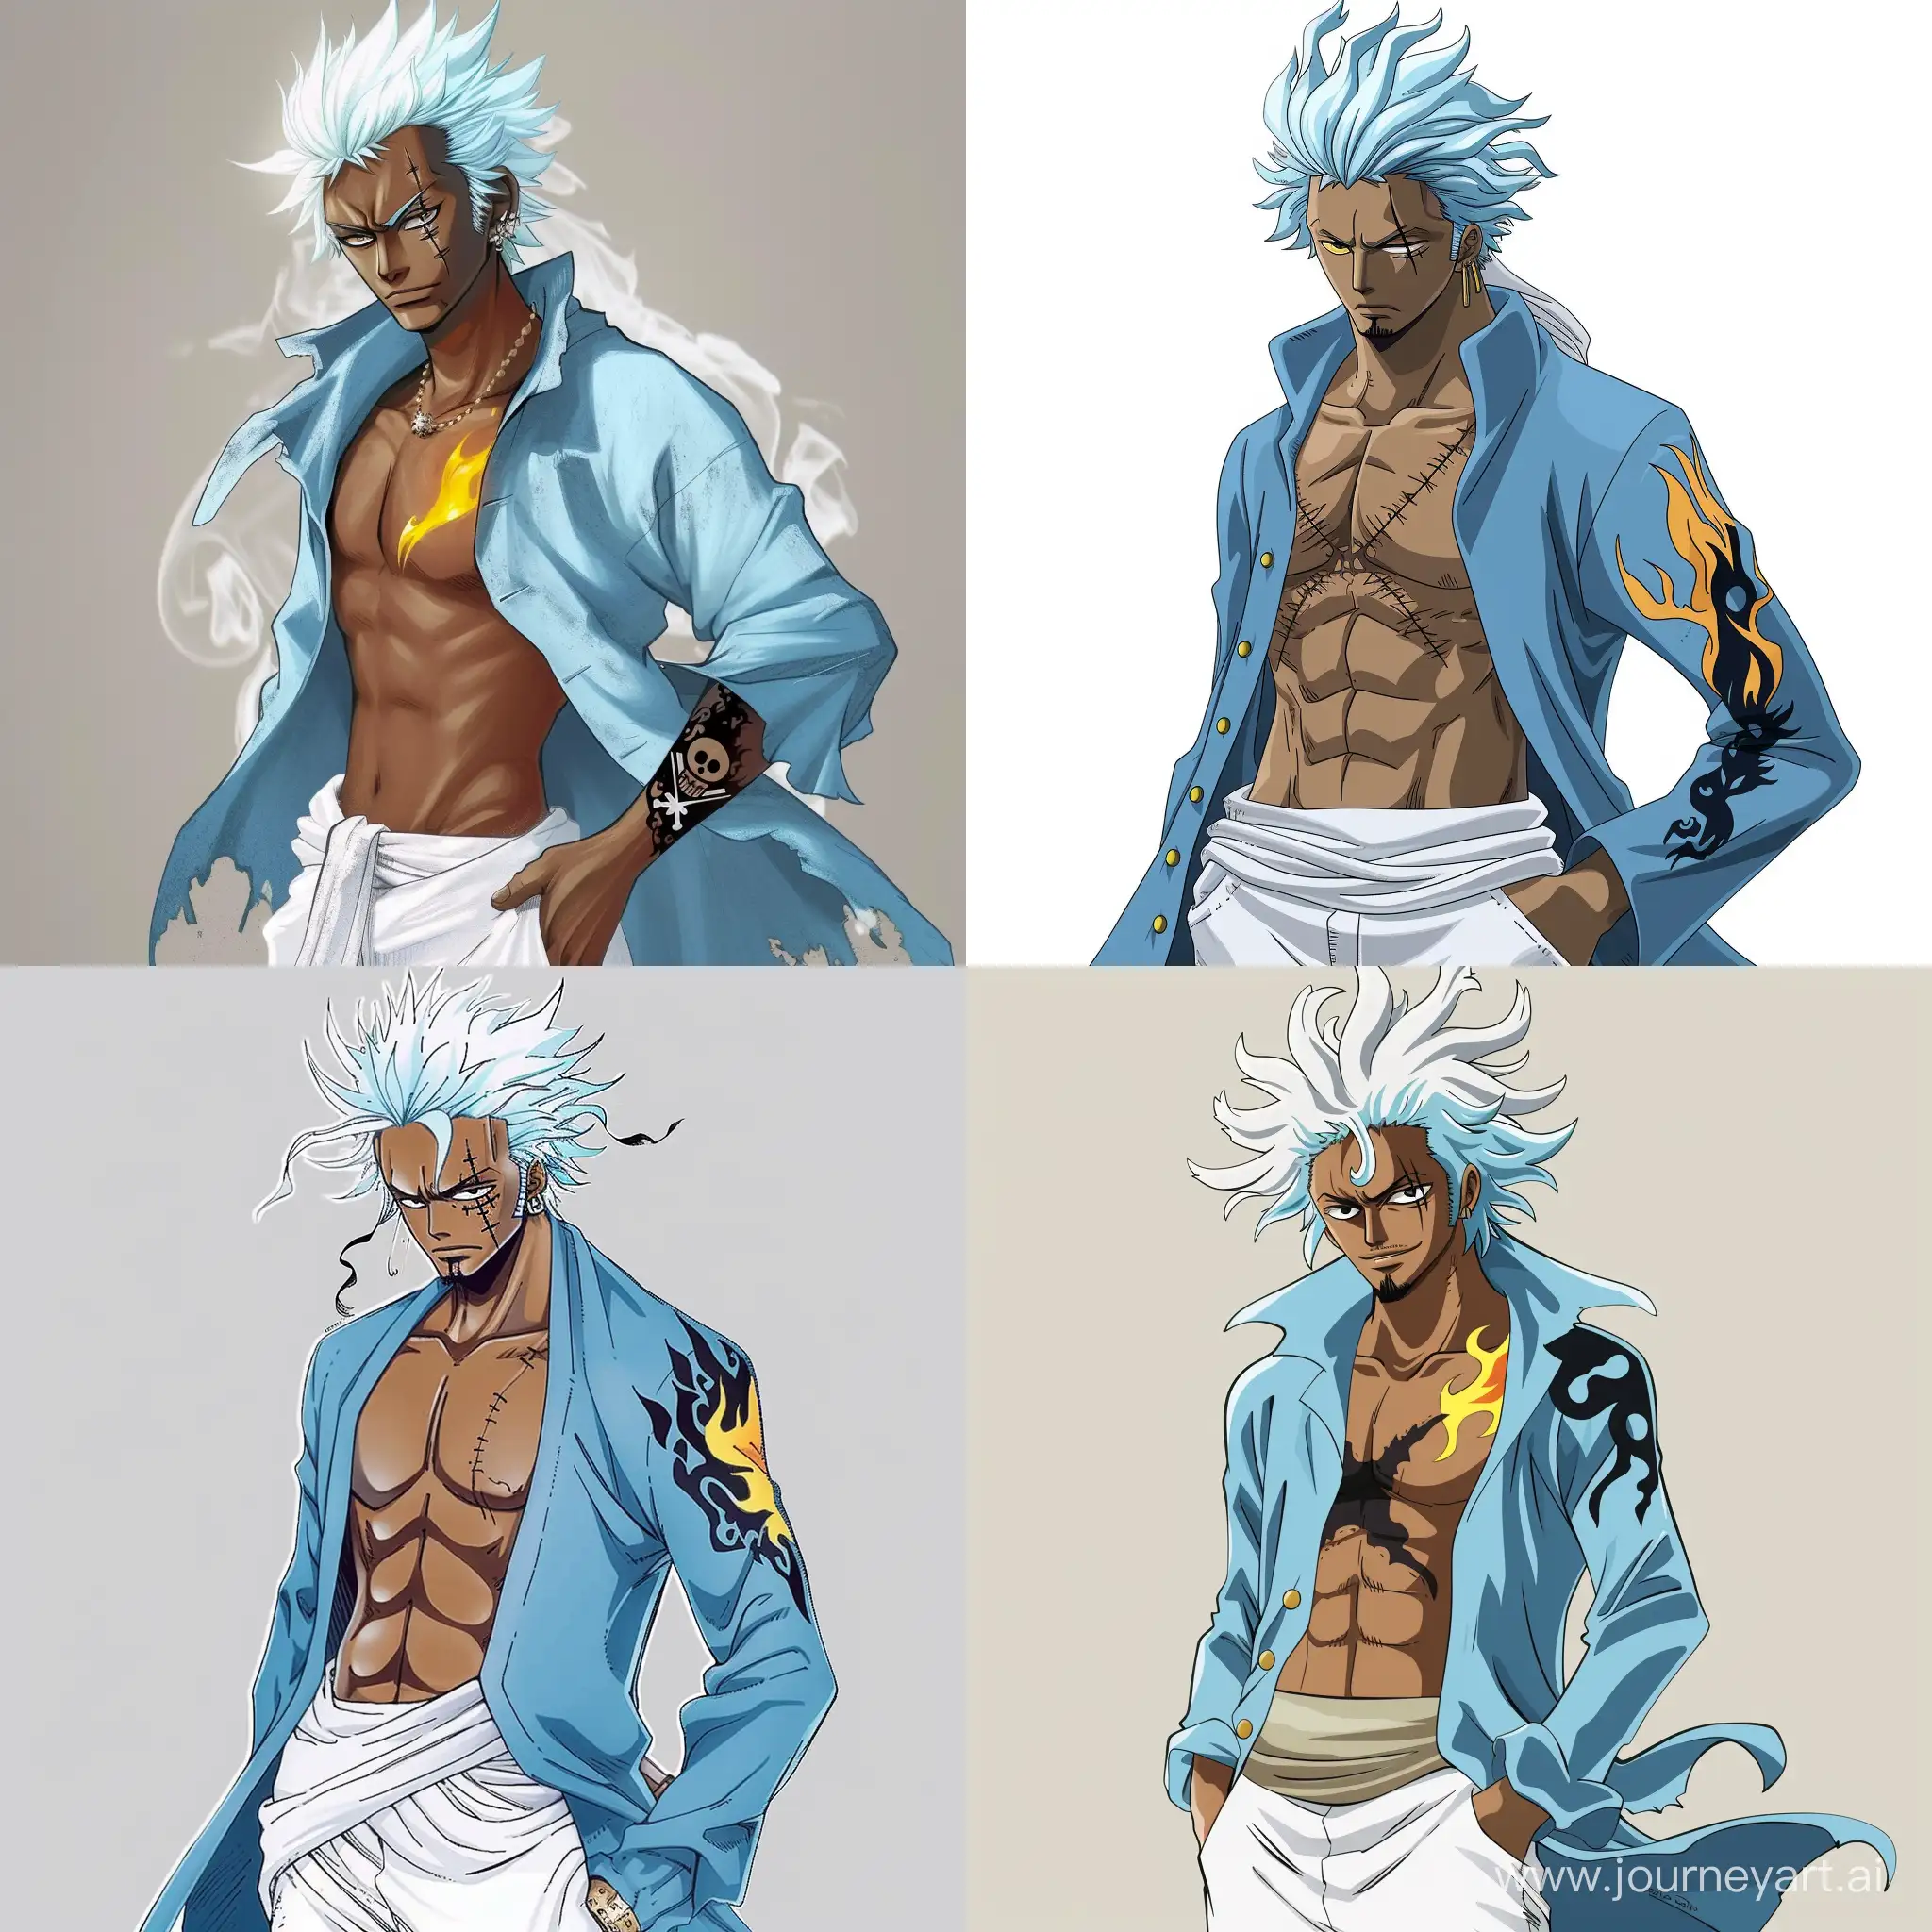 Shandia-Youth-with-Unique-Appearance-Dark-Skinned-One-Piece-Character-with-White-and-Blue-Hair-and-Flame-Tattoo